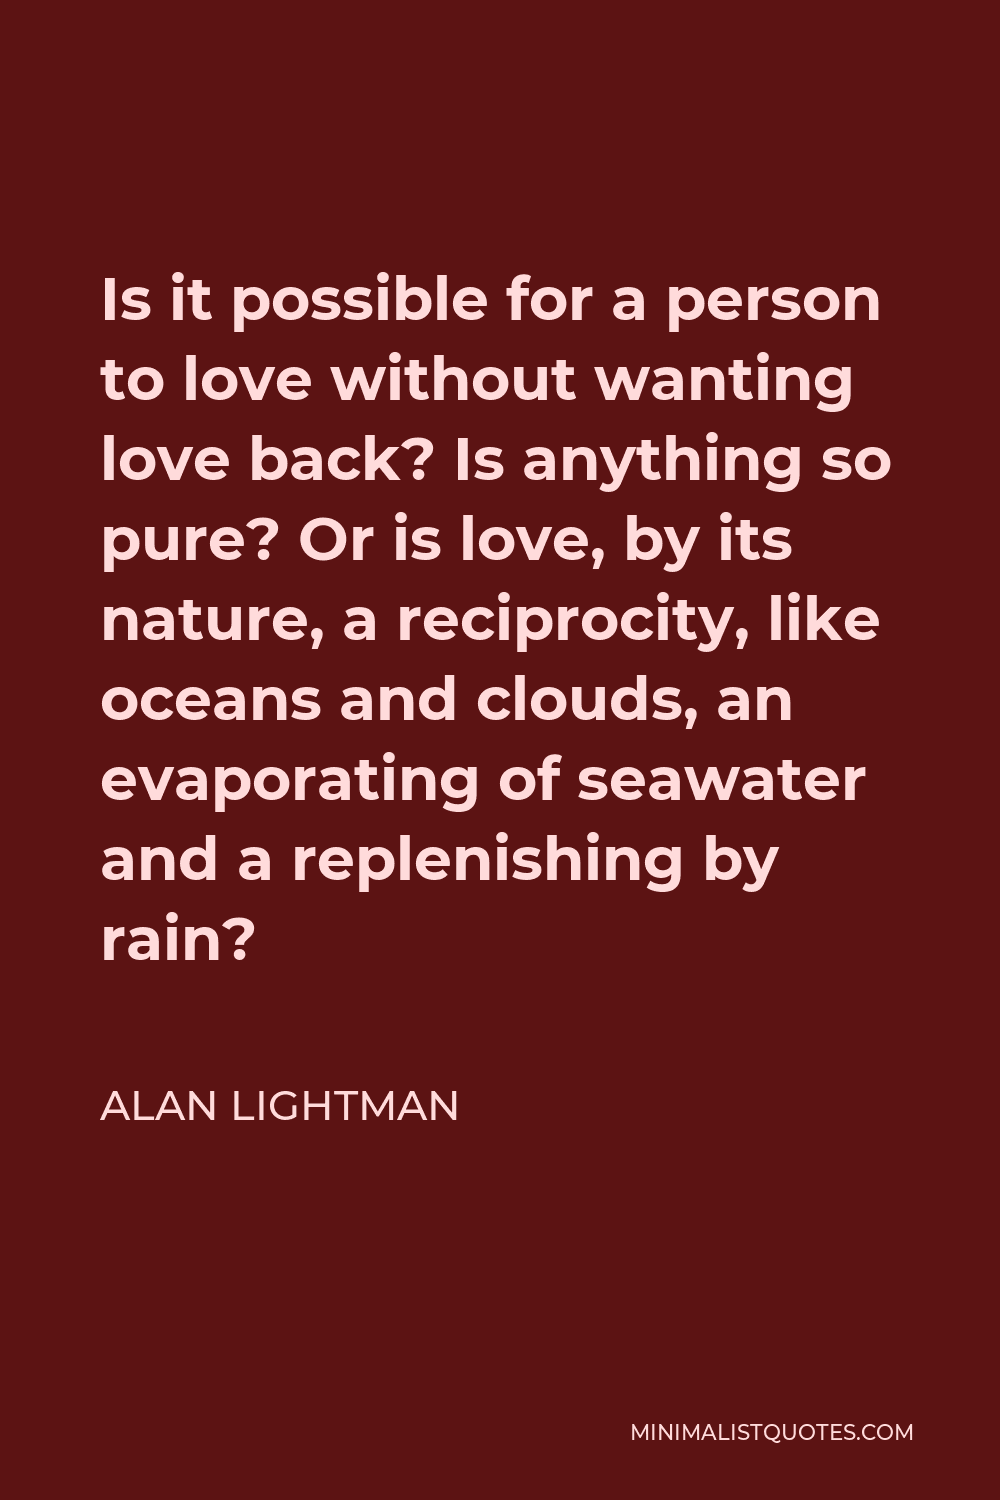 Alan Lightman Quote - Is it possible for a person to love without wanting love back? Is anything so pure? Or is love, by its nature, a reciprocity, like oceans and clouds, an evaporating of seawater and a replenishing by rain?